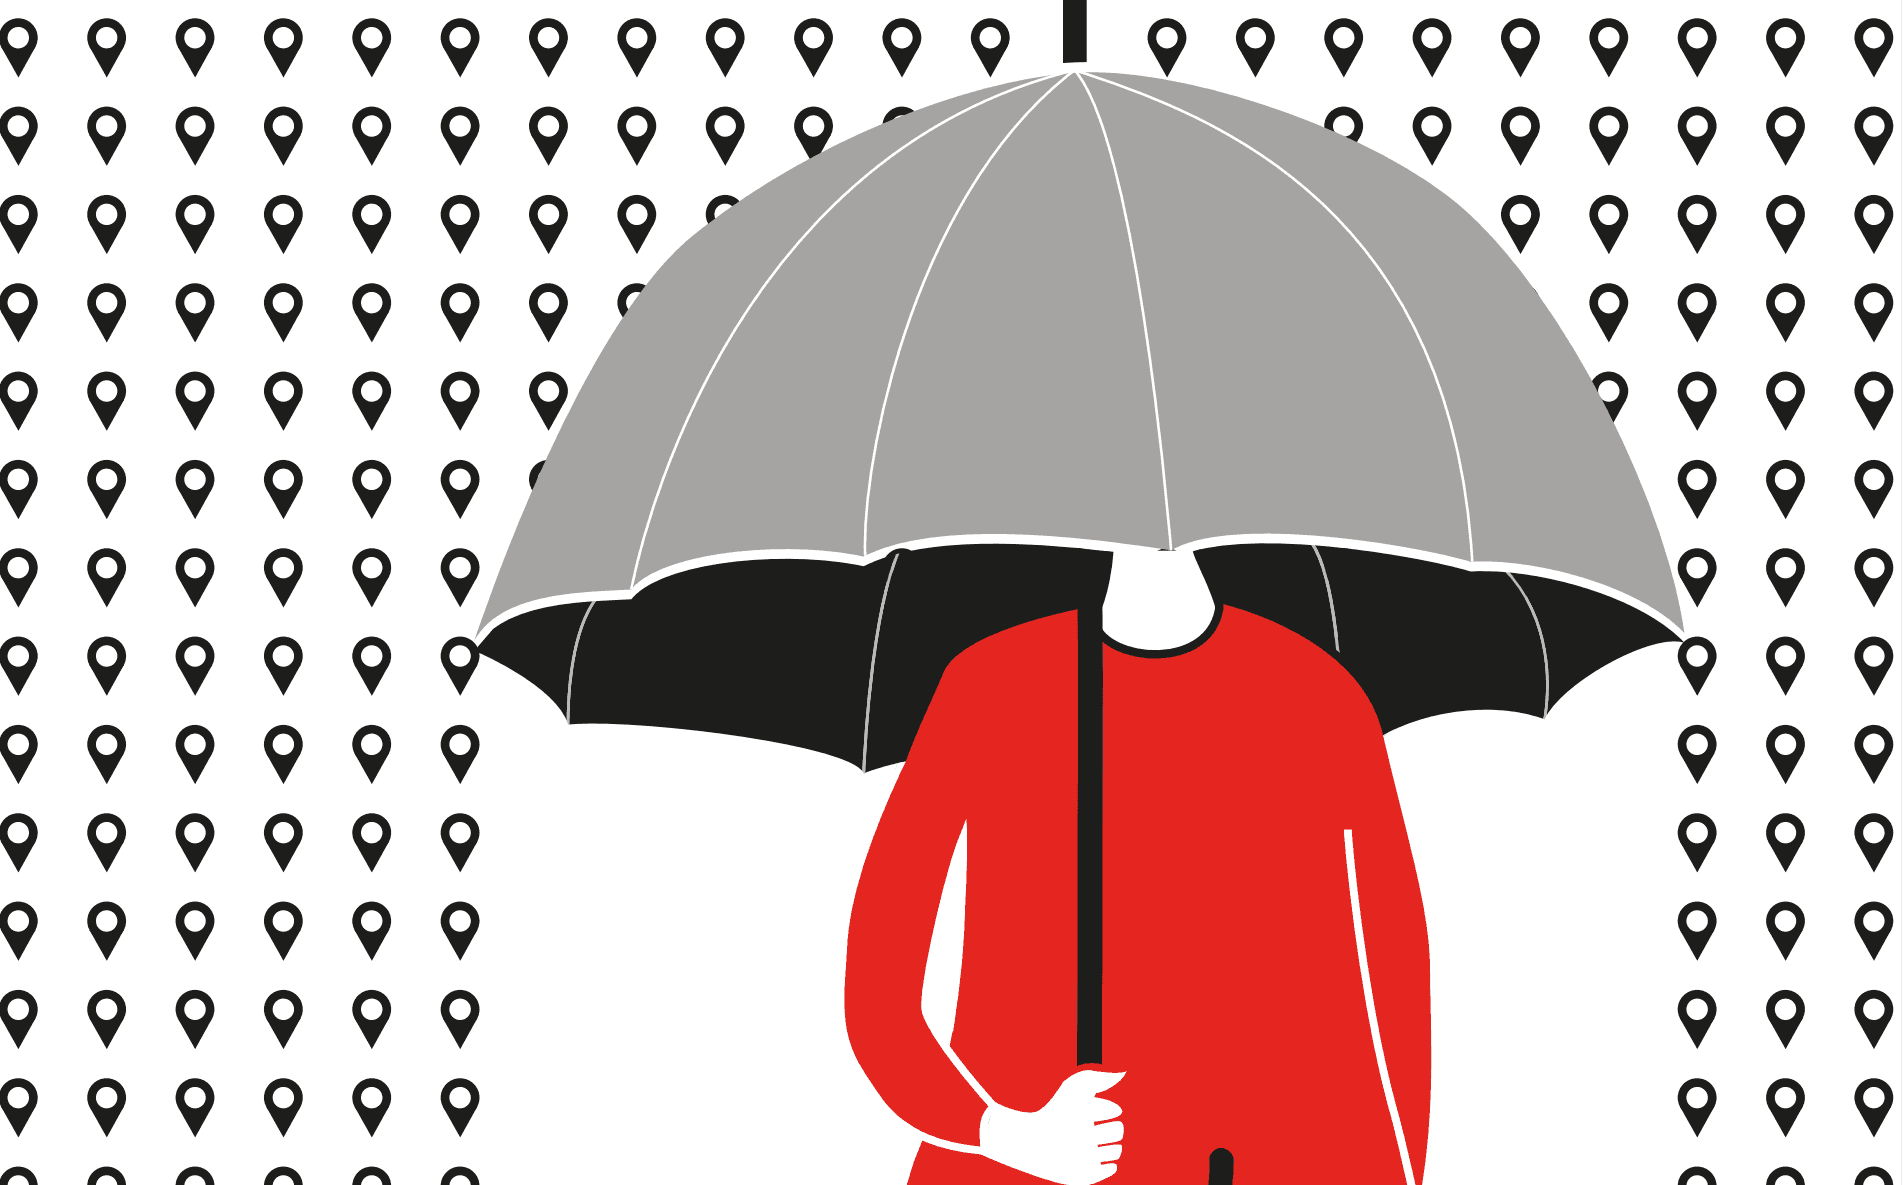 Illustration of a person in a red shirt under an umbrella with digital "rain" falling.